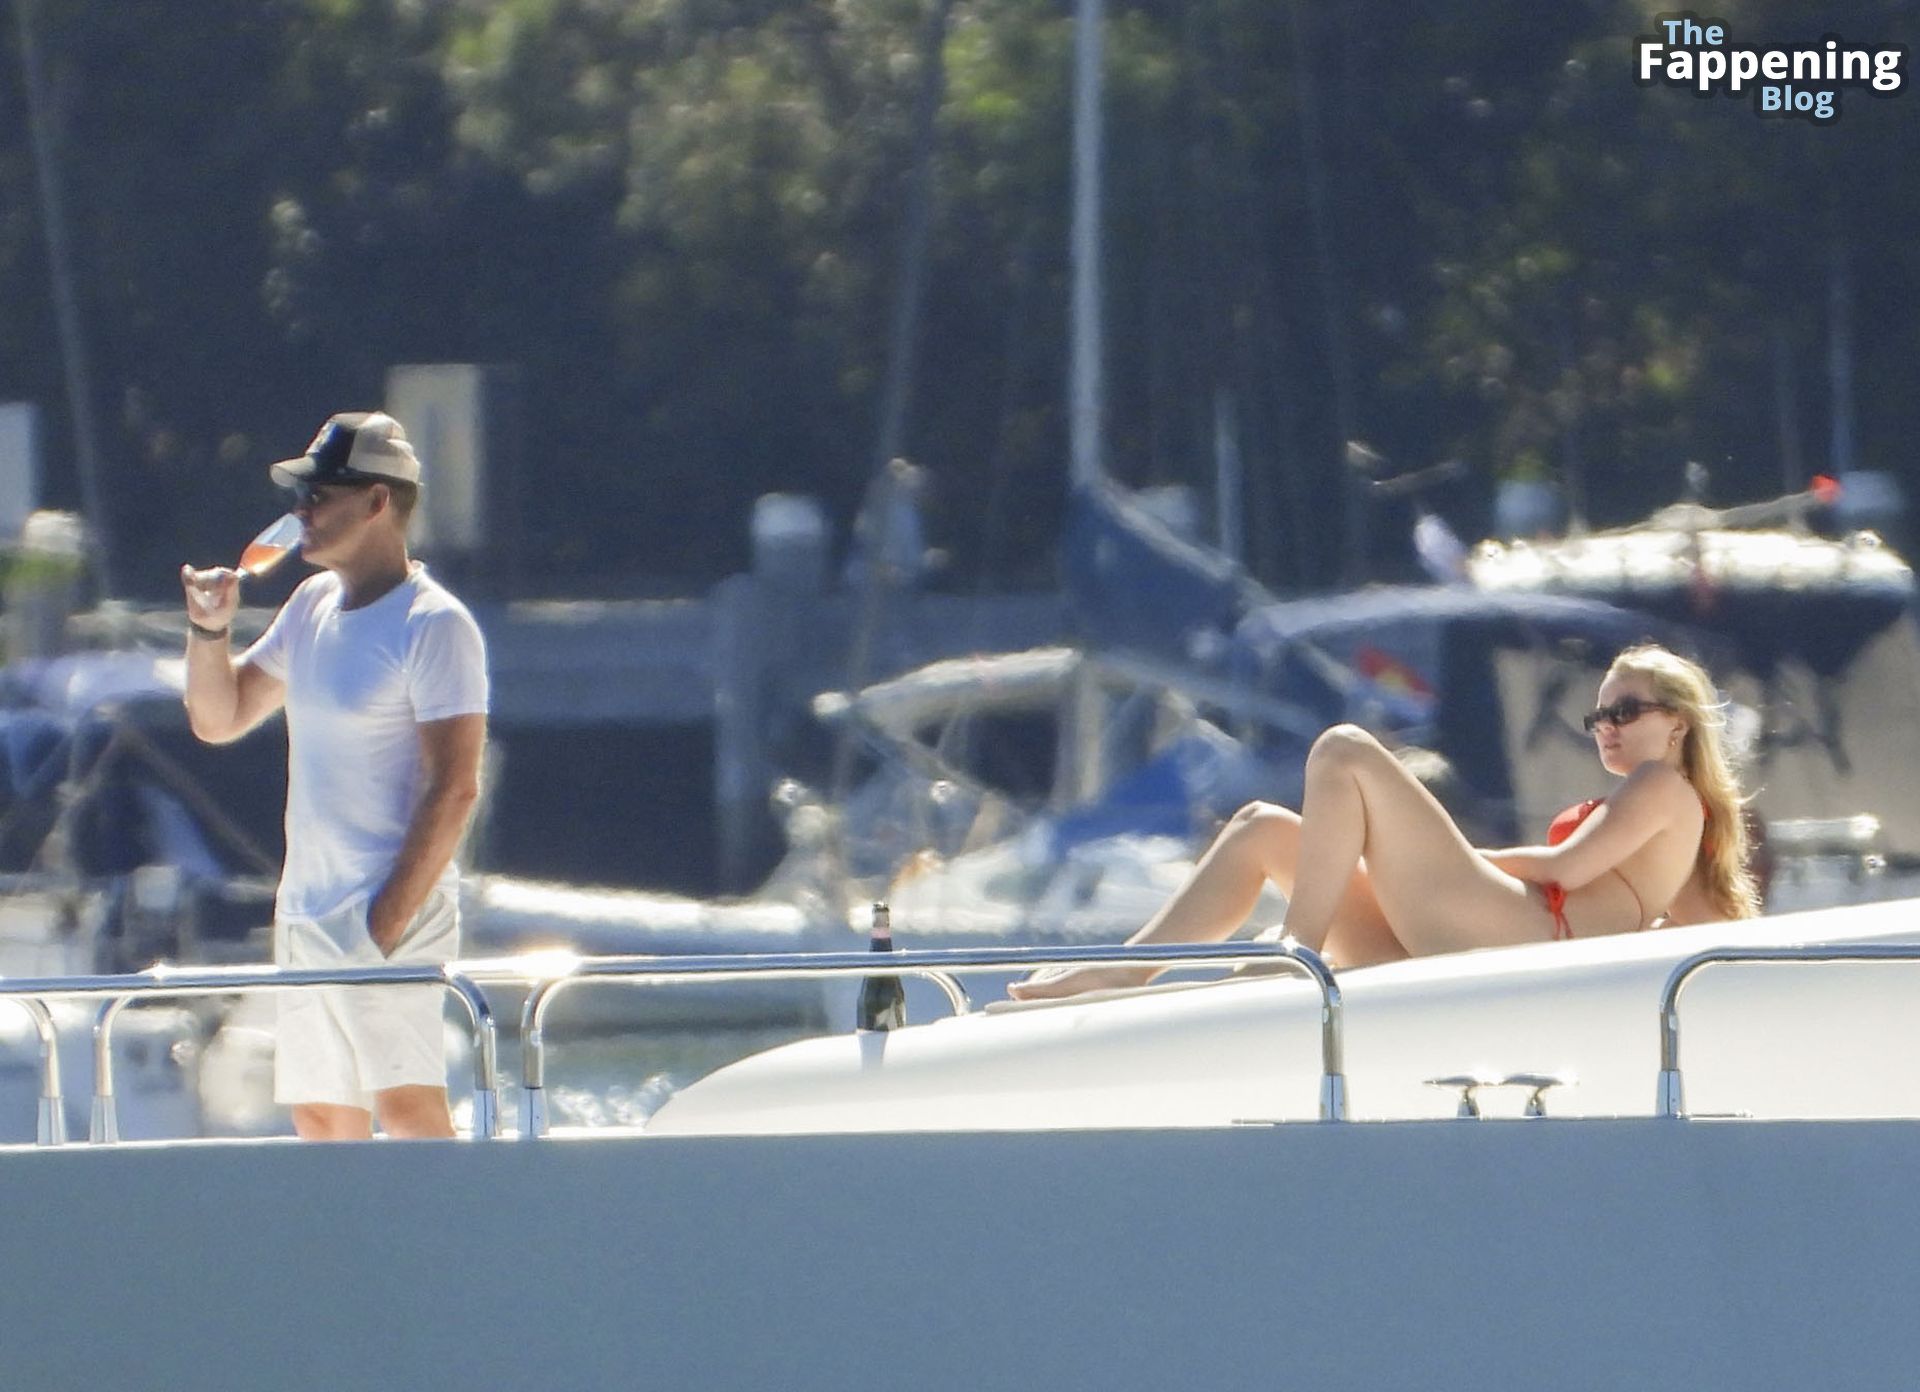 Jemma Donovan Enjoys a Day on Sydney Harbour Aboard a Luxury Yacht with Her Father (21 Photos)